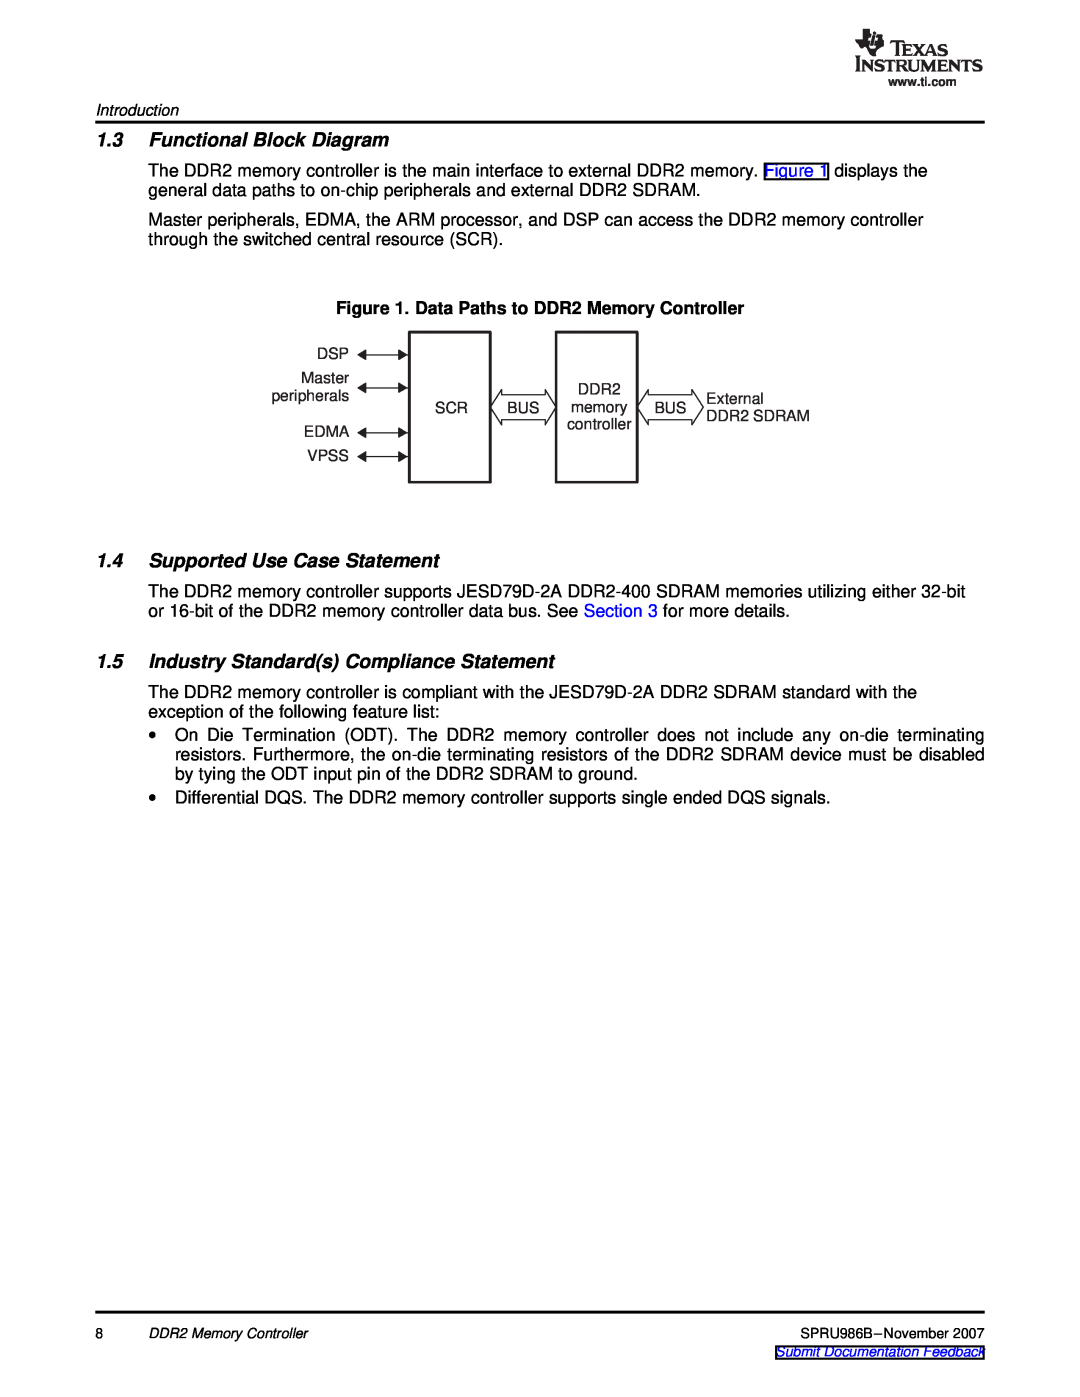 Texas Instruments TMS320DM643 Functional Block Diagram, Supported Use Case Statement, Data Paths to DDR2 Memory Controller 